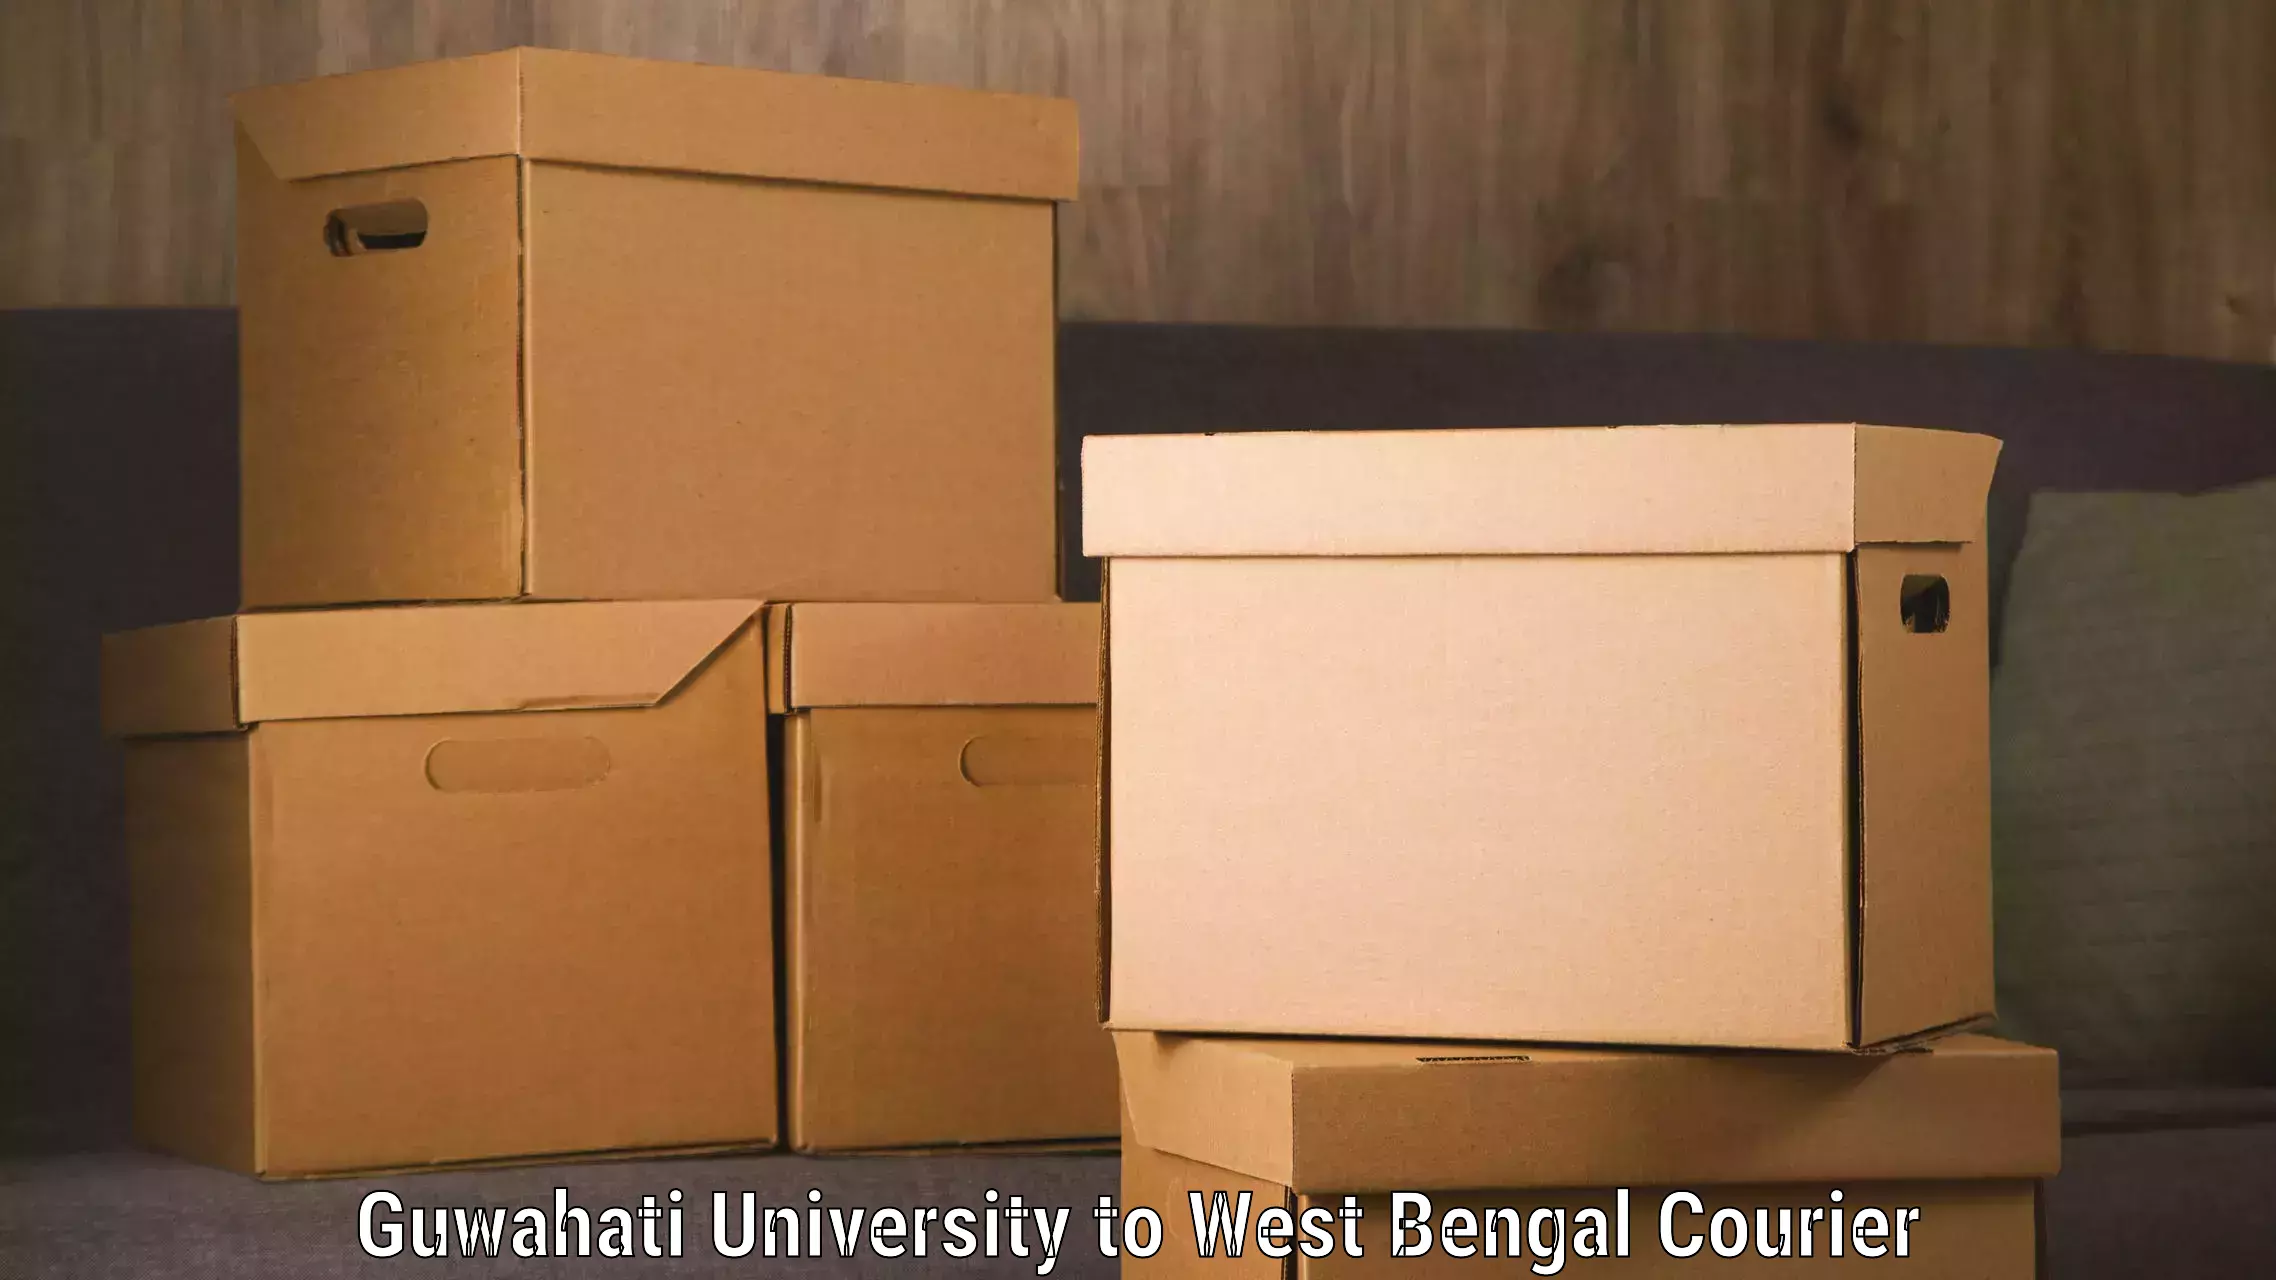 Luggage delivery system Guwahati University to West Bengal